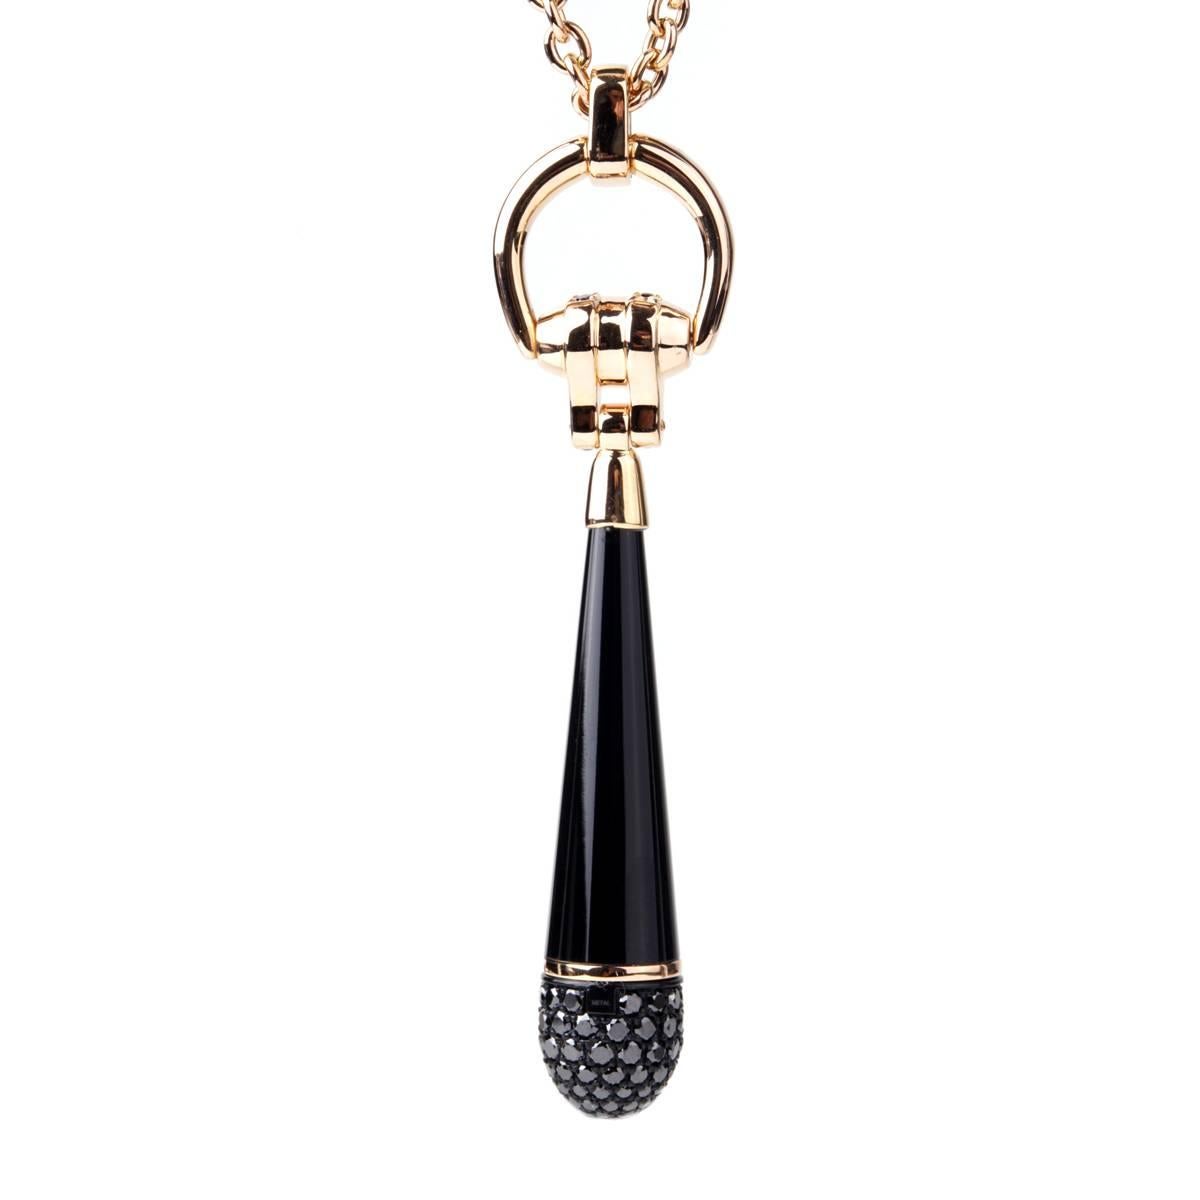 The 18-karat pink gold Horsebit Necklace from Gucci is an attention-grabbing piece. Featuring black diamonds and black corundum formed into an obelisk shaped pendant, the necklace is made to last. In addition, the horsebit design elements are a